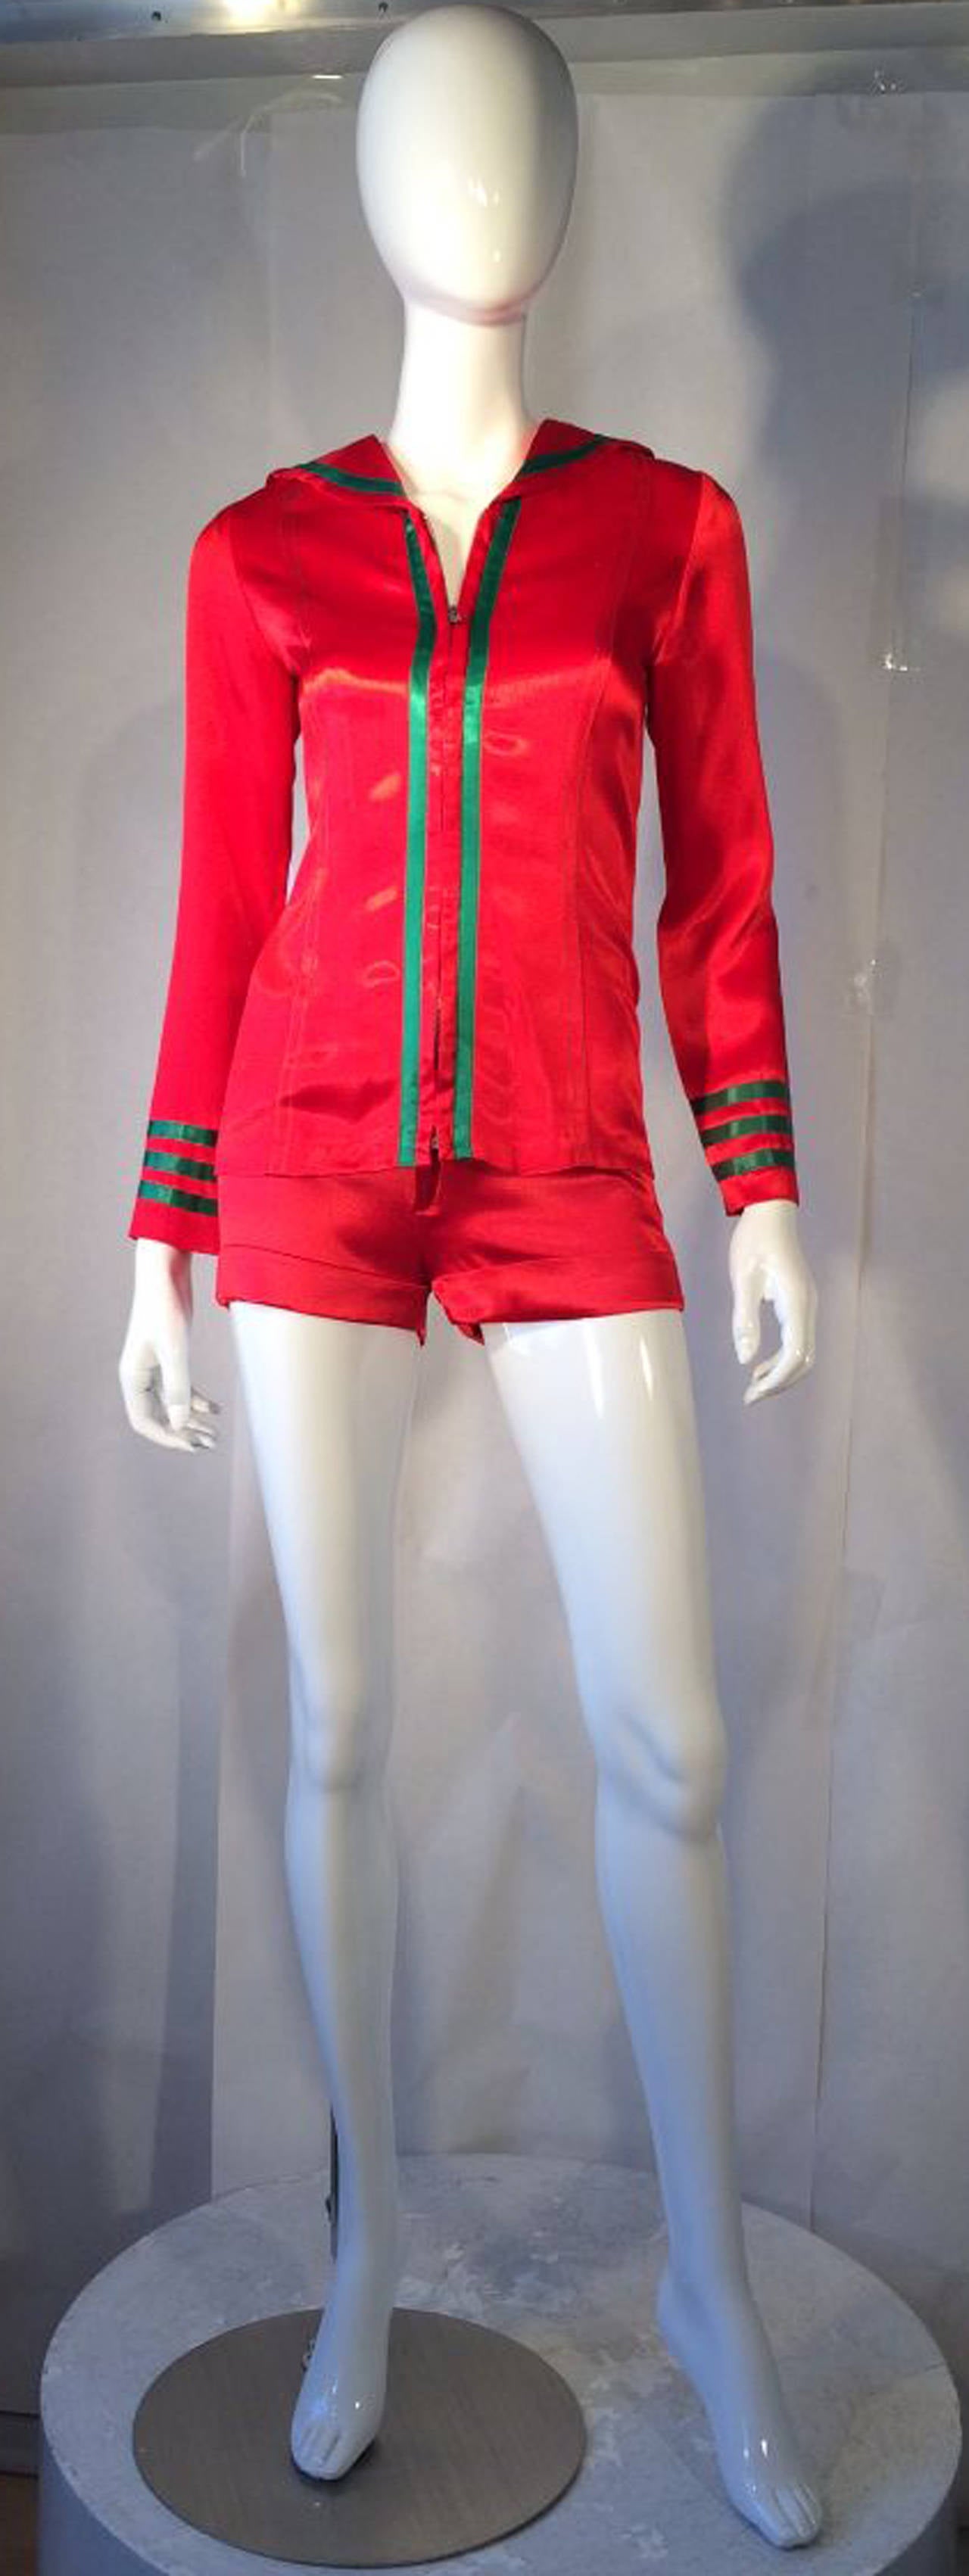 A fine and rare vintage Mr. Freedom 2pc. satin sailor suit. Iconic Pop Art item previously owned and worn by Astrid Wyman, 1969. Shiny and vibrant red silk satin items feature contrasting green satin trim and applique yolk details. Both top and hot